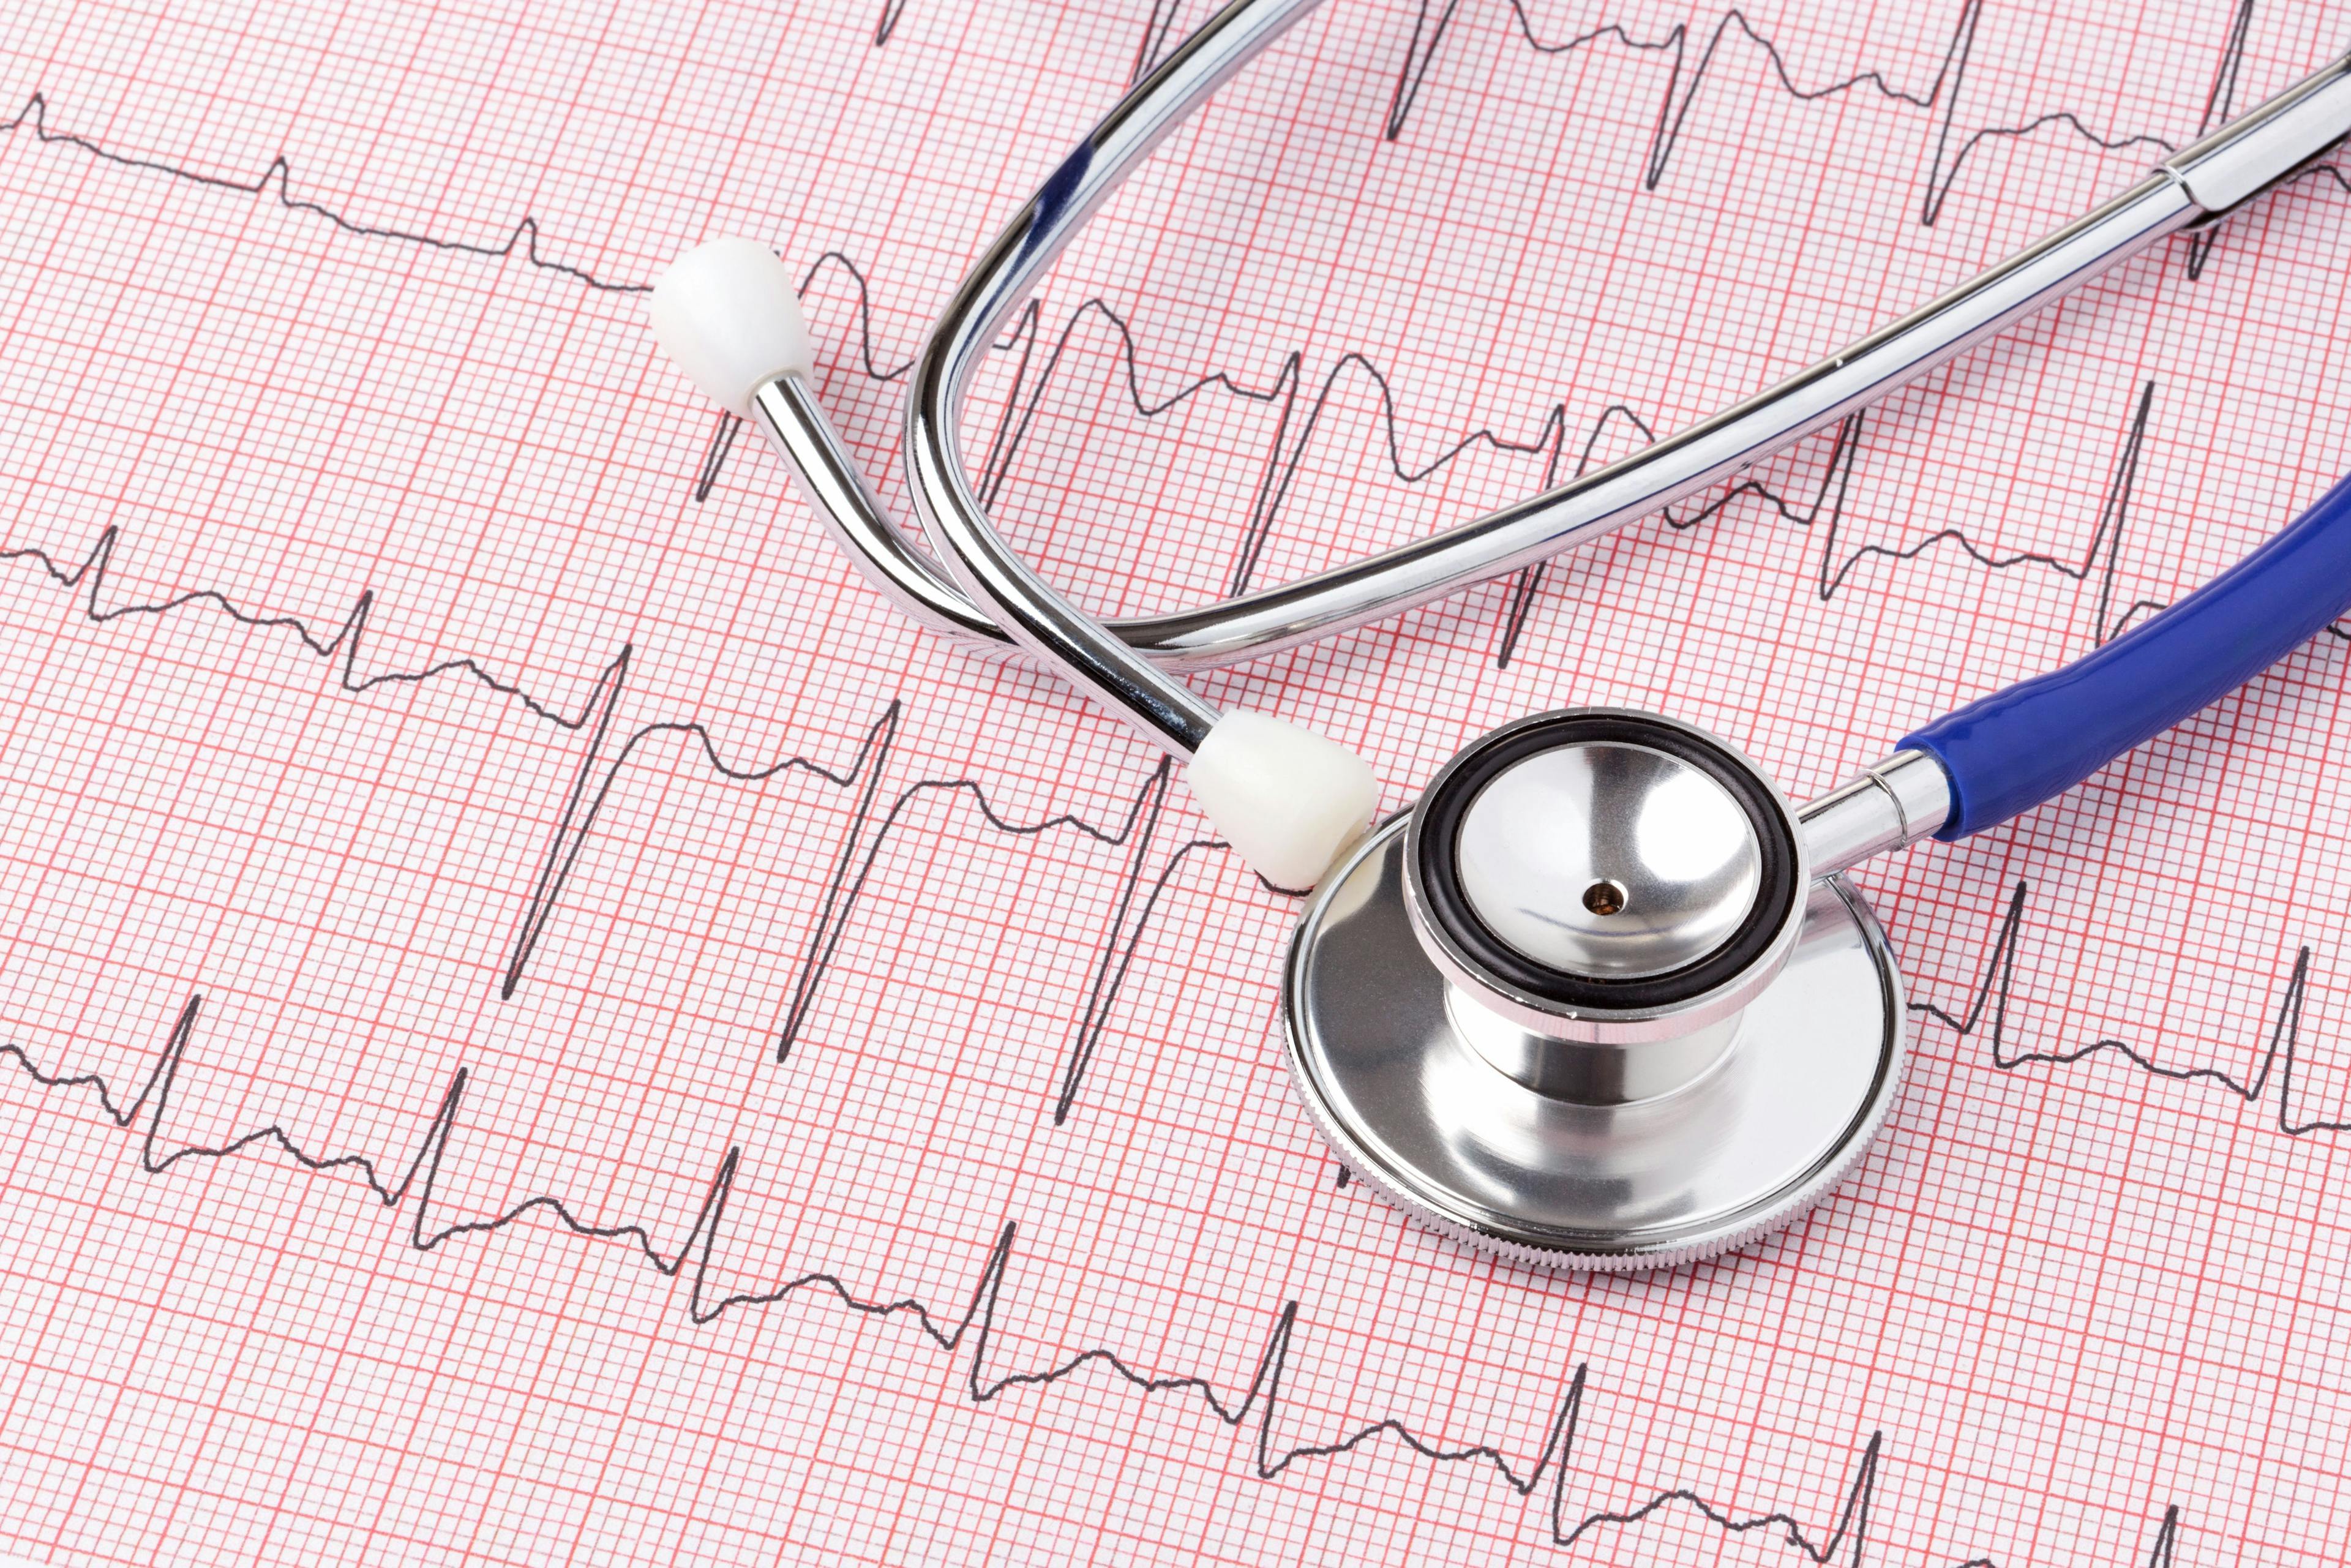 Ablation Linked to Lower Incidence of Dementia in AFib Patients